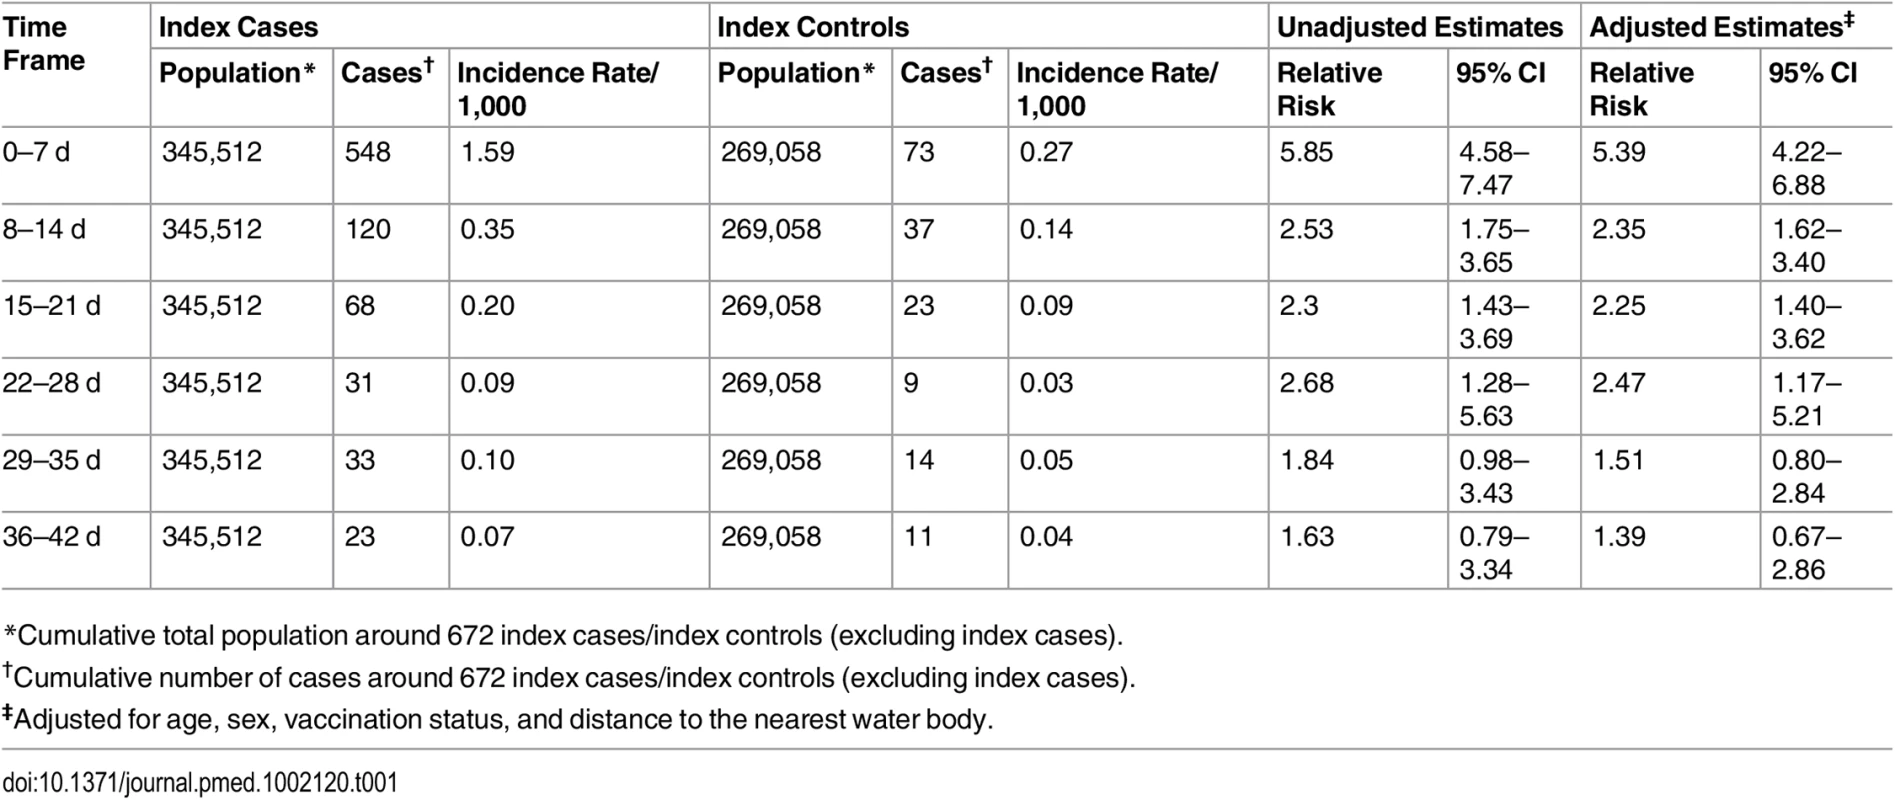 Incidence rate and risk among individuals living within 25 m of index cases relative to individuals living within 25 m of index controls.